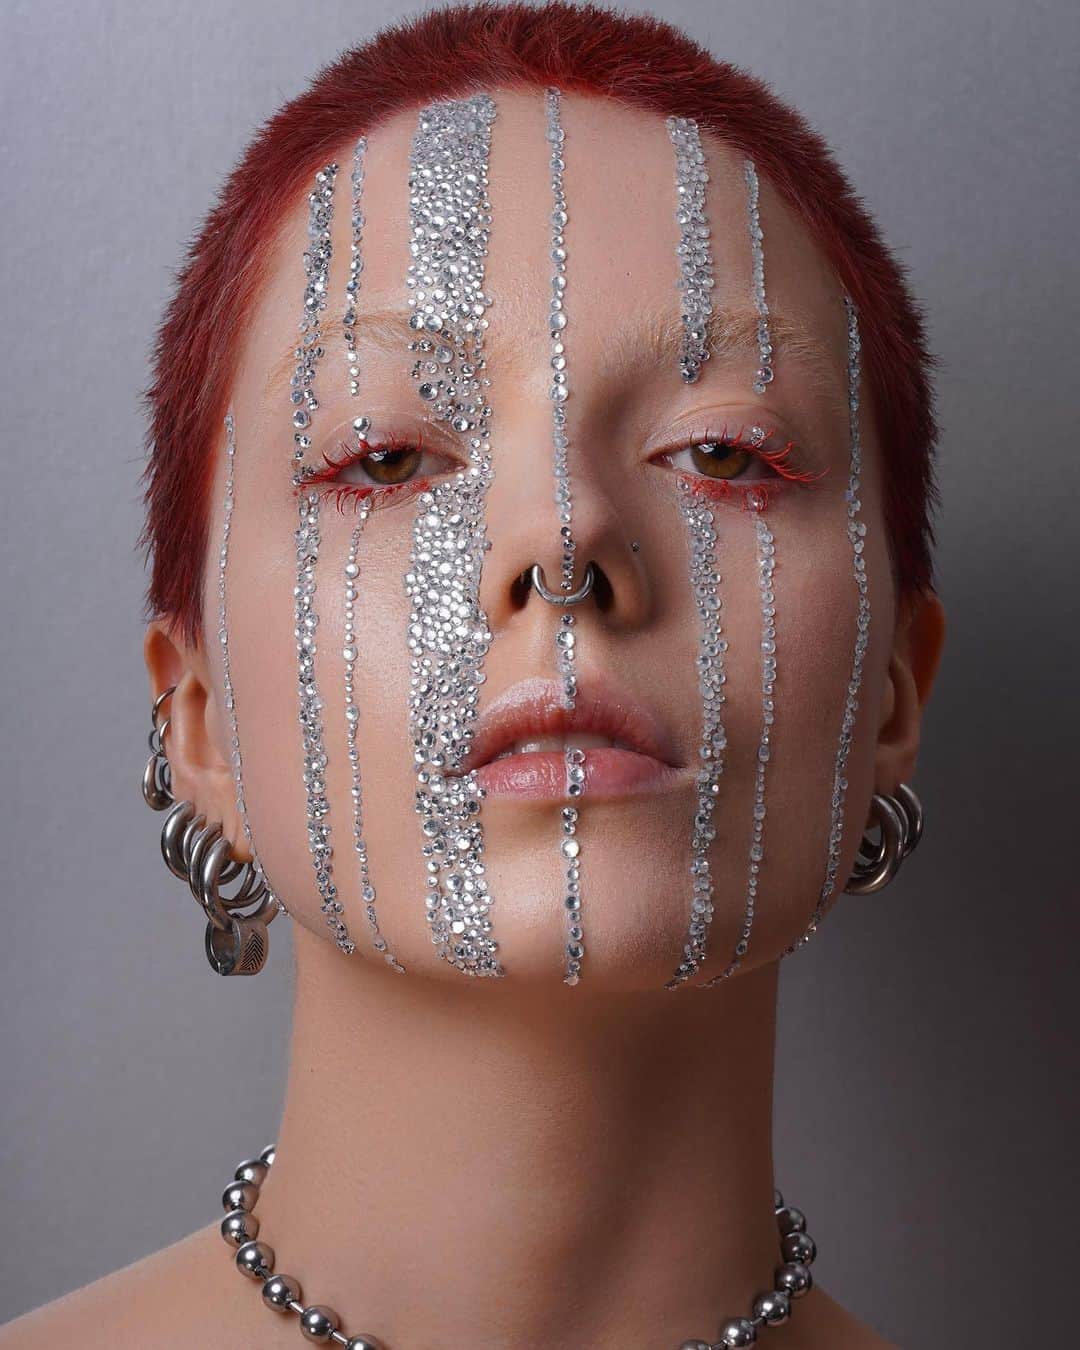 MAKE UP FOR EVER OFFICIALのインスタグラム：「HOT FROM THE ACADEMY   @makeupforeveracademy student @aryasigned created this look inspired by the city of Marseille: "I wanted to represent the flats of Marseille, that have lots of window bars… I added strass stones to symbolize the richness of every souls living there"  Model: @_lenita.h_ Photographer: @clovislalanne  #MAKEUPFOREVER」